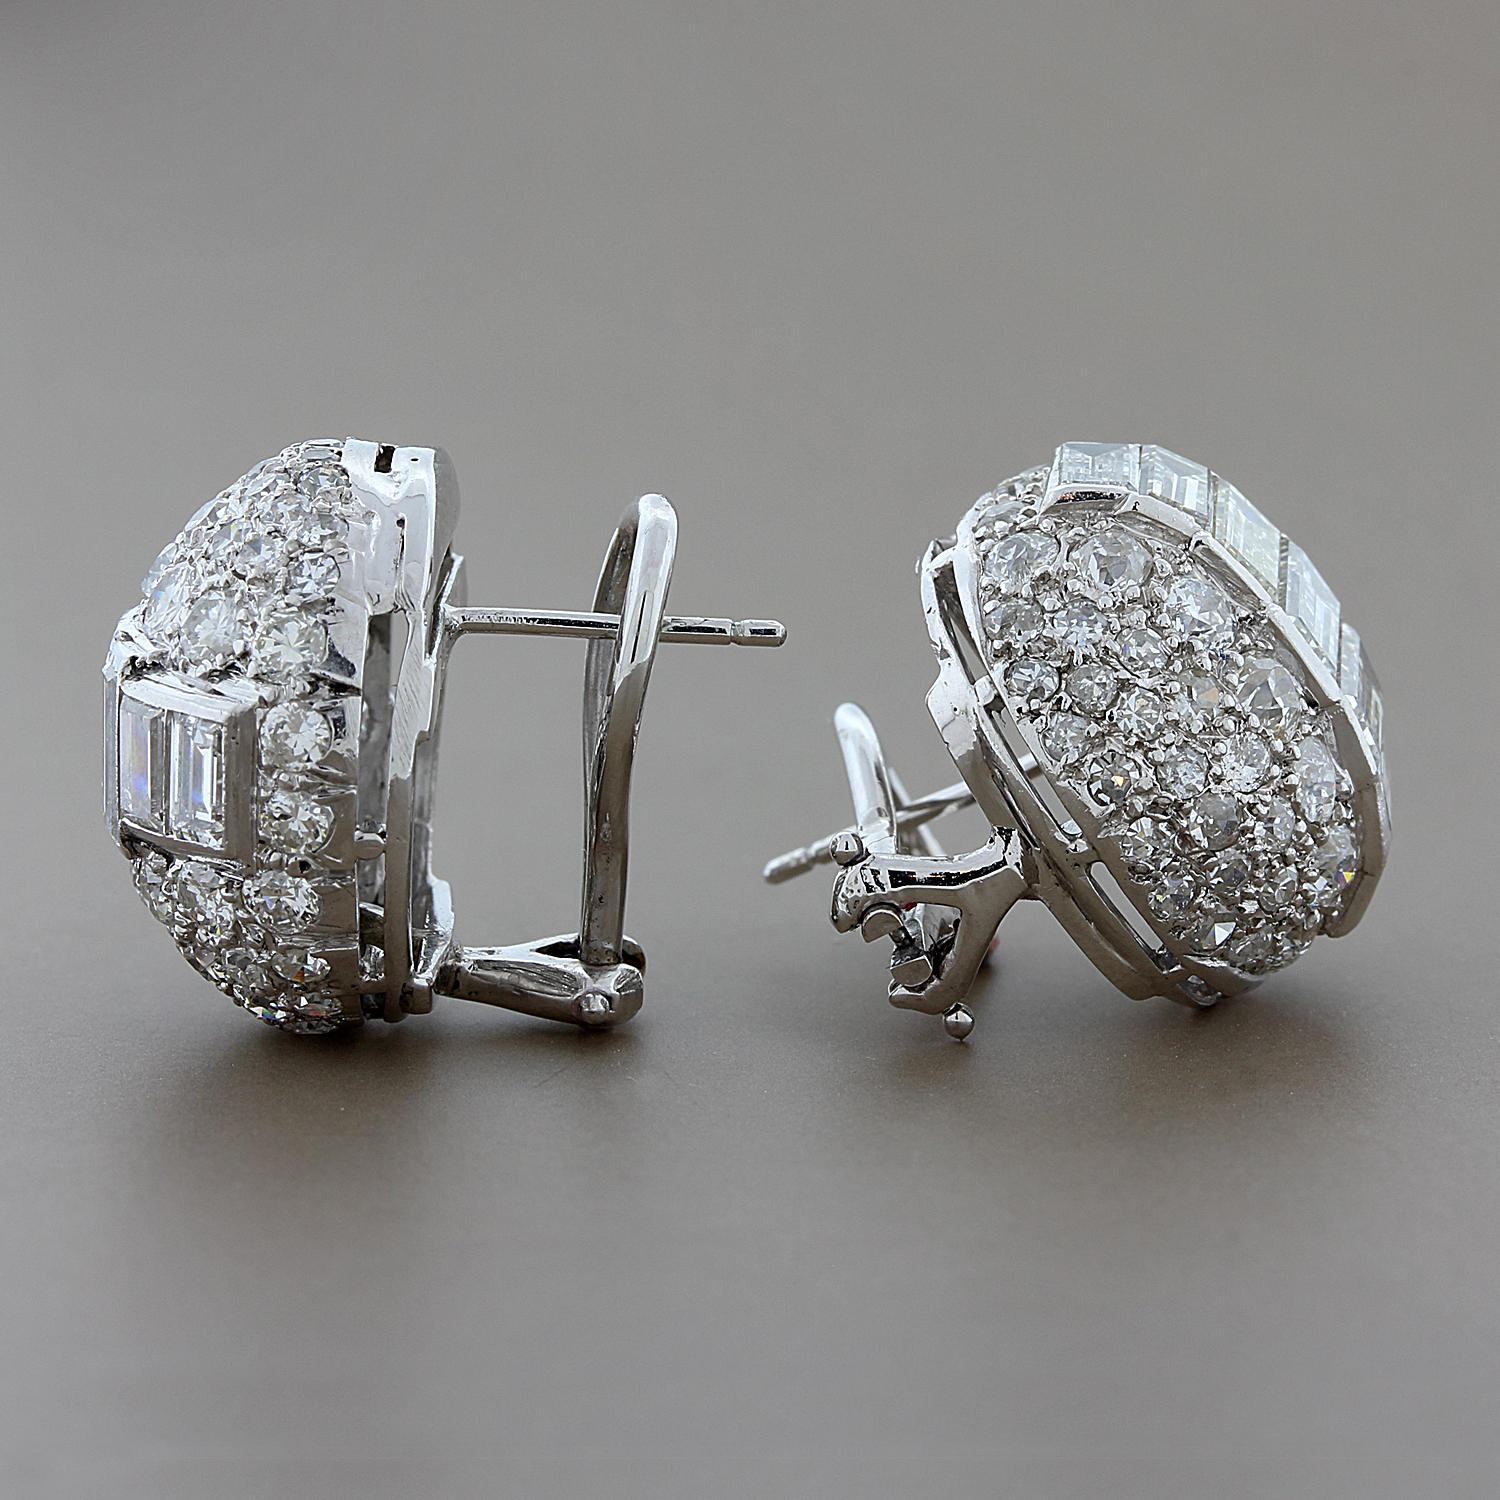 10 carats of emerald and old round cut diamonds are featured in these earrings. The diamonds are VS clarity and G-H color. Graduating emerald cut diamonds run the center in a channel setting, while prong set old round cut diamonds surround. The